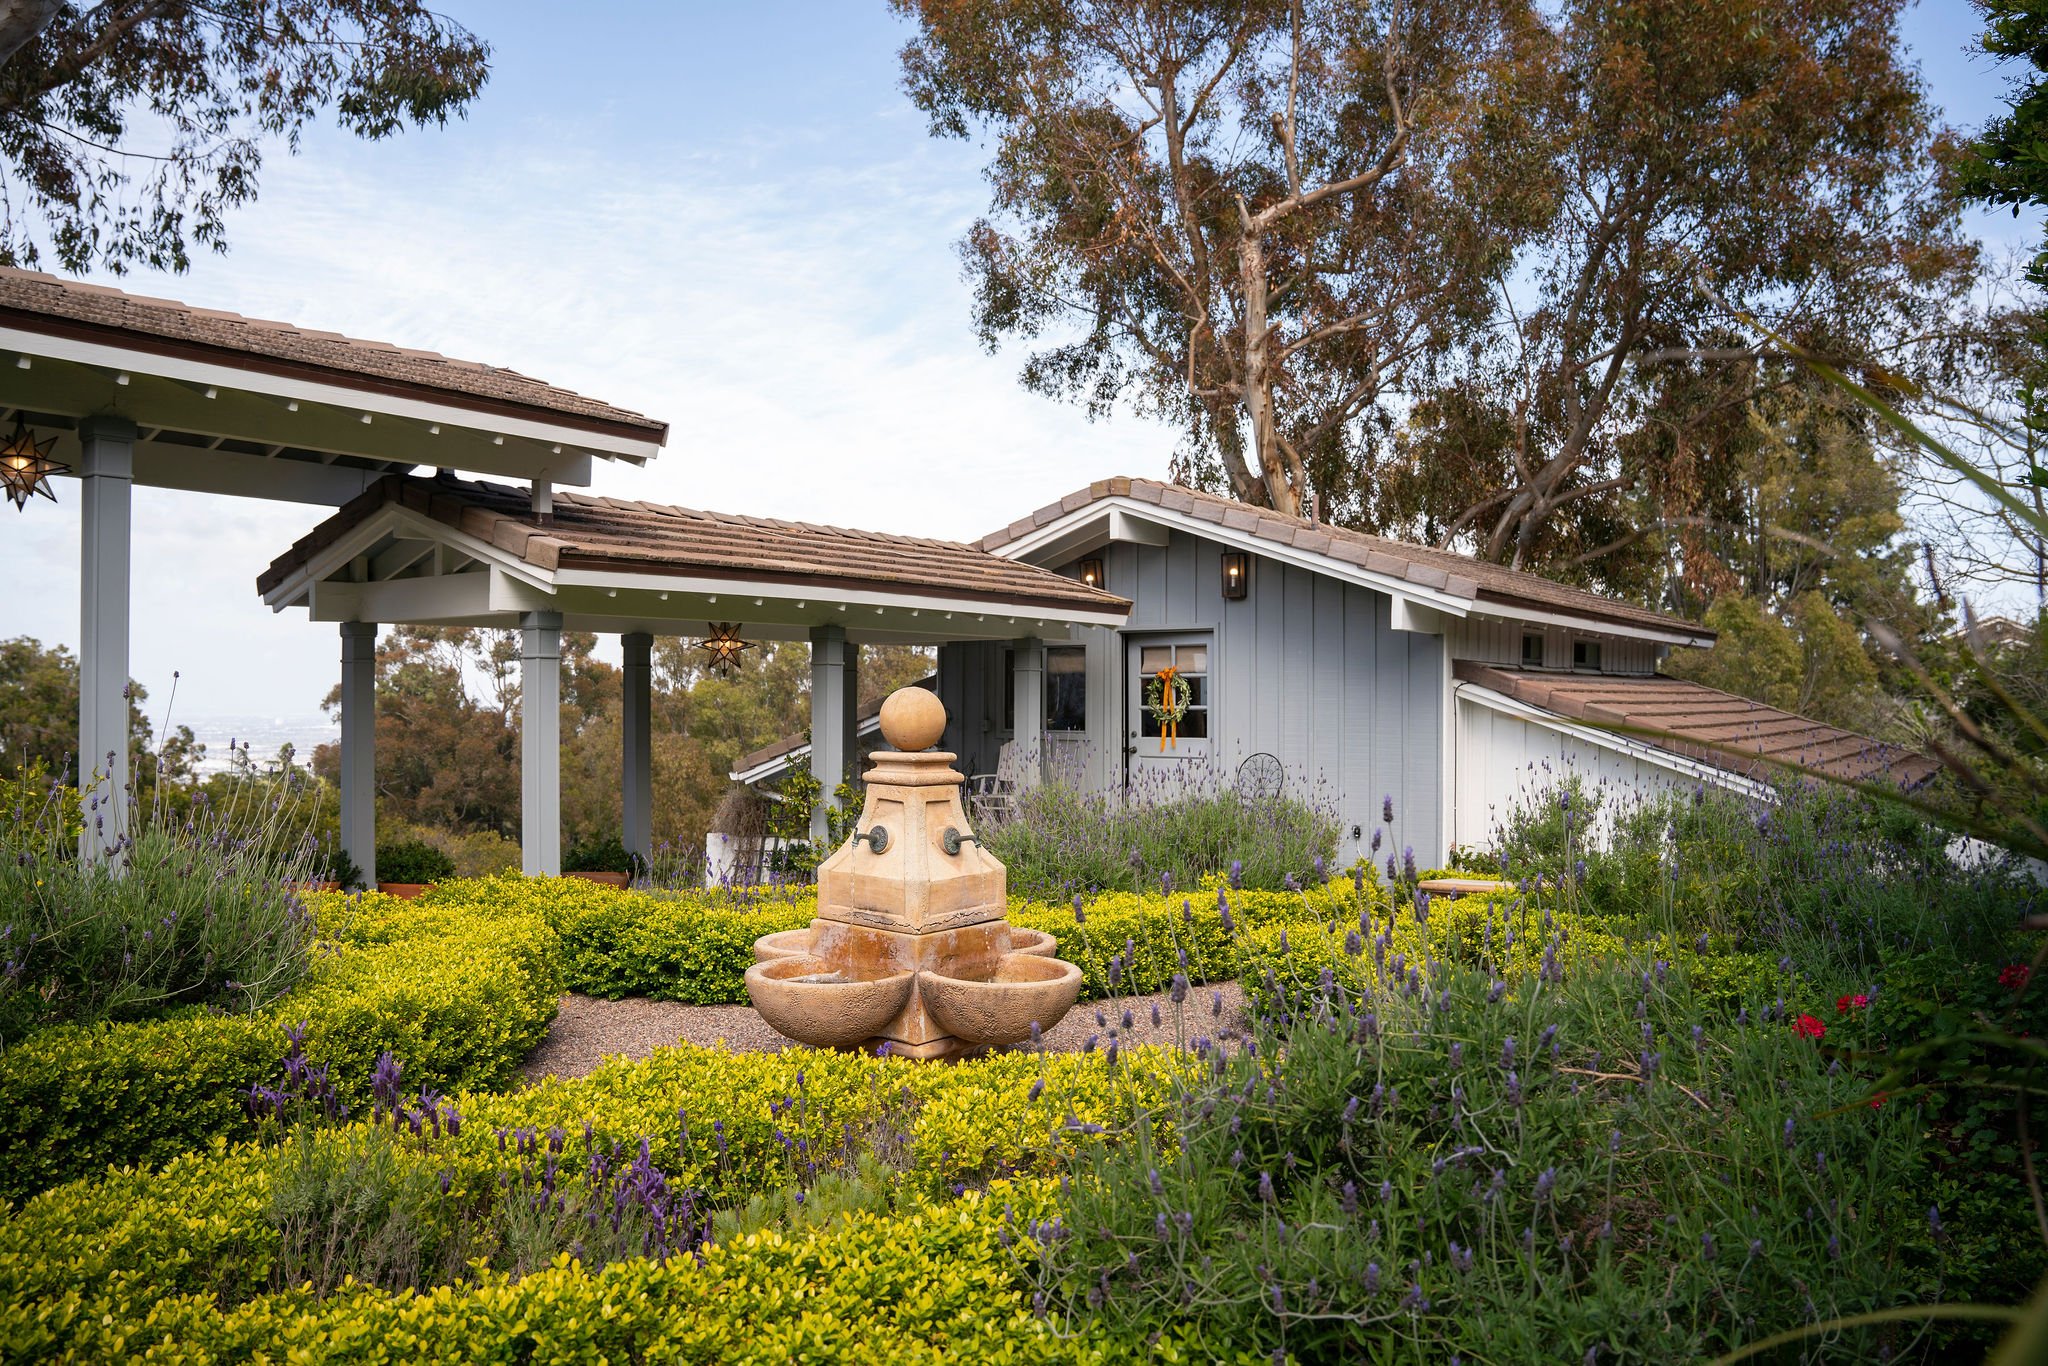 Francis York This Mid-Century Ranch with Award-Winning Vineyards is a ‘House of Dreams’ in Palos Verdes, California 51.jpg